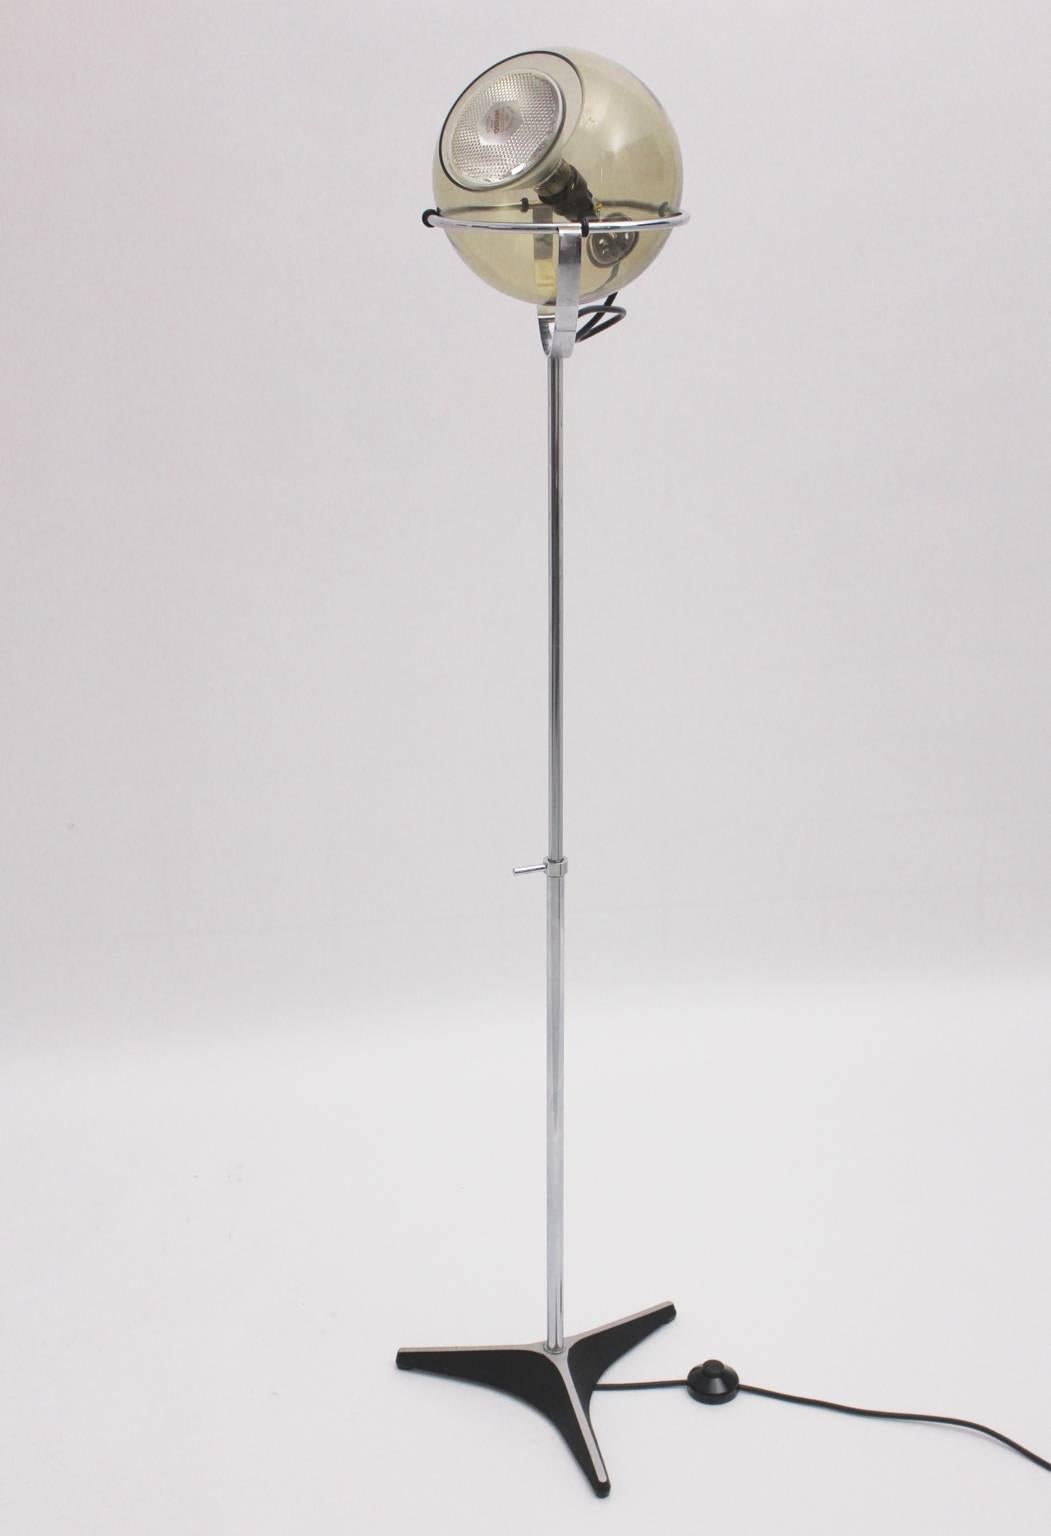 Space age vintage floor lamp designed by Frank Lightelijn for Atelier Raak, 1961, Amsterdam, Netherland.
The floor lamp shows a  tripod black lacquered aluminium foot and chrome tube steel, which features a pivoting glass globe with one socket E